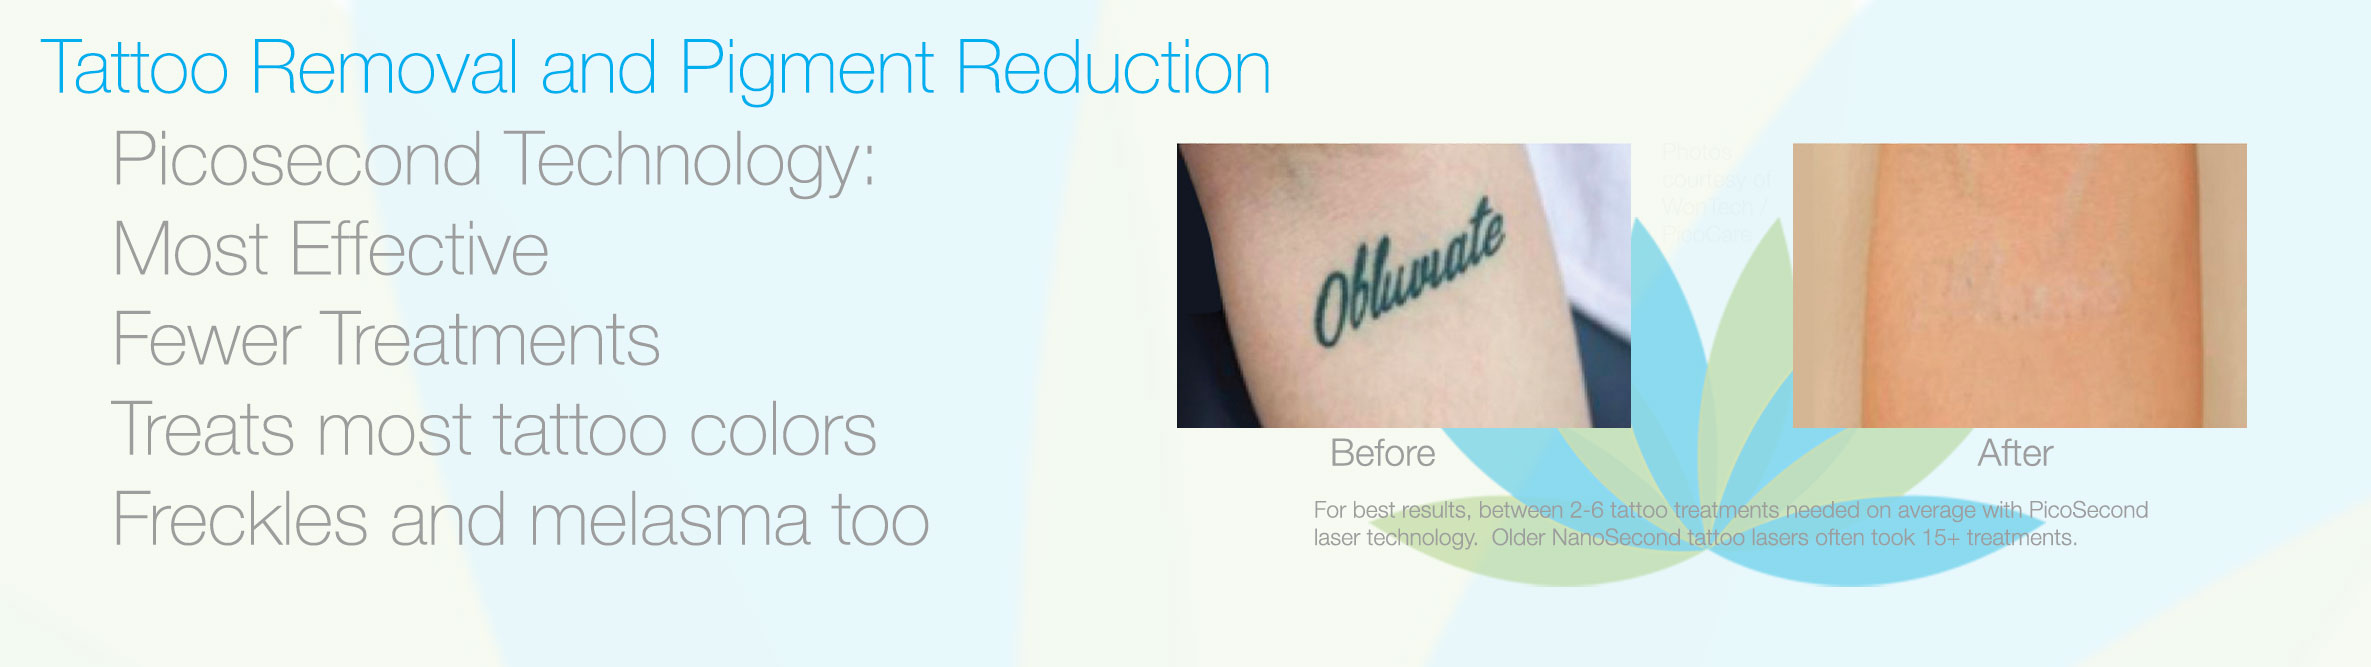 HandPost Aesthetic Clinic  Tattoo Removal  Pigmentation